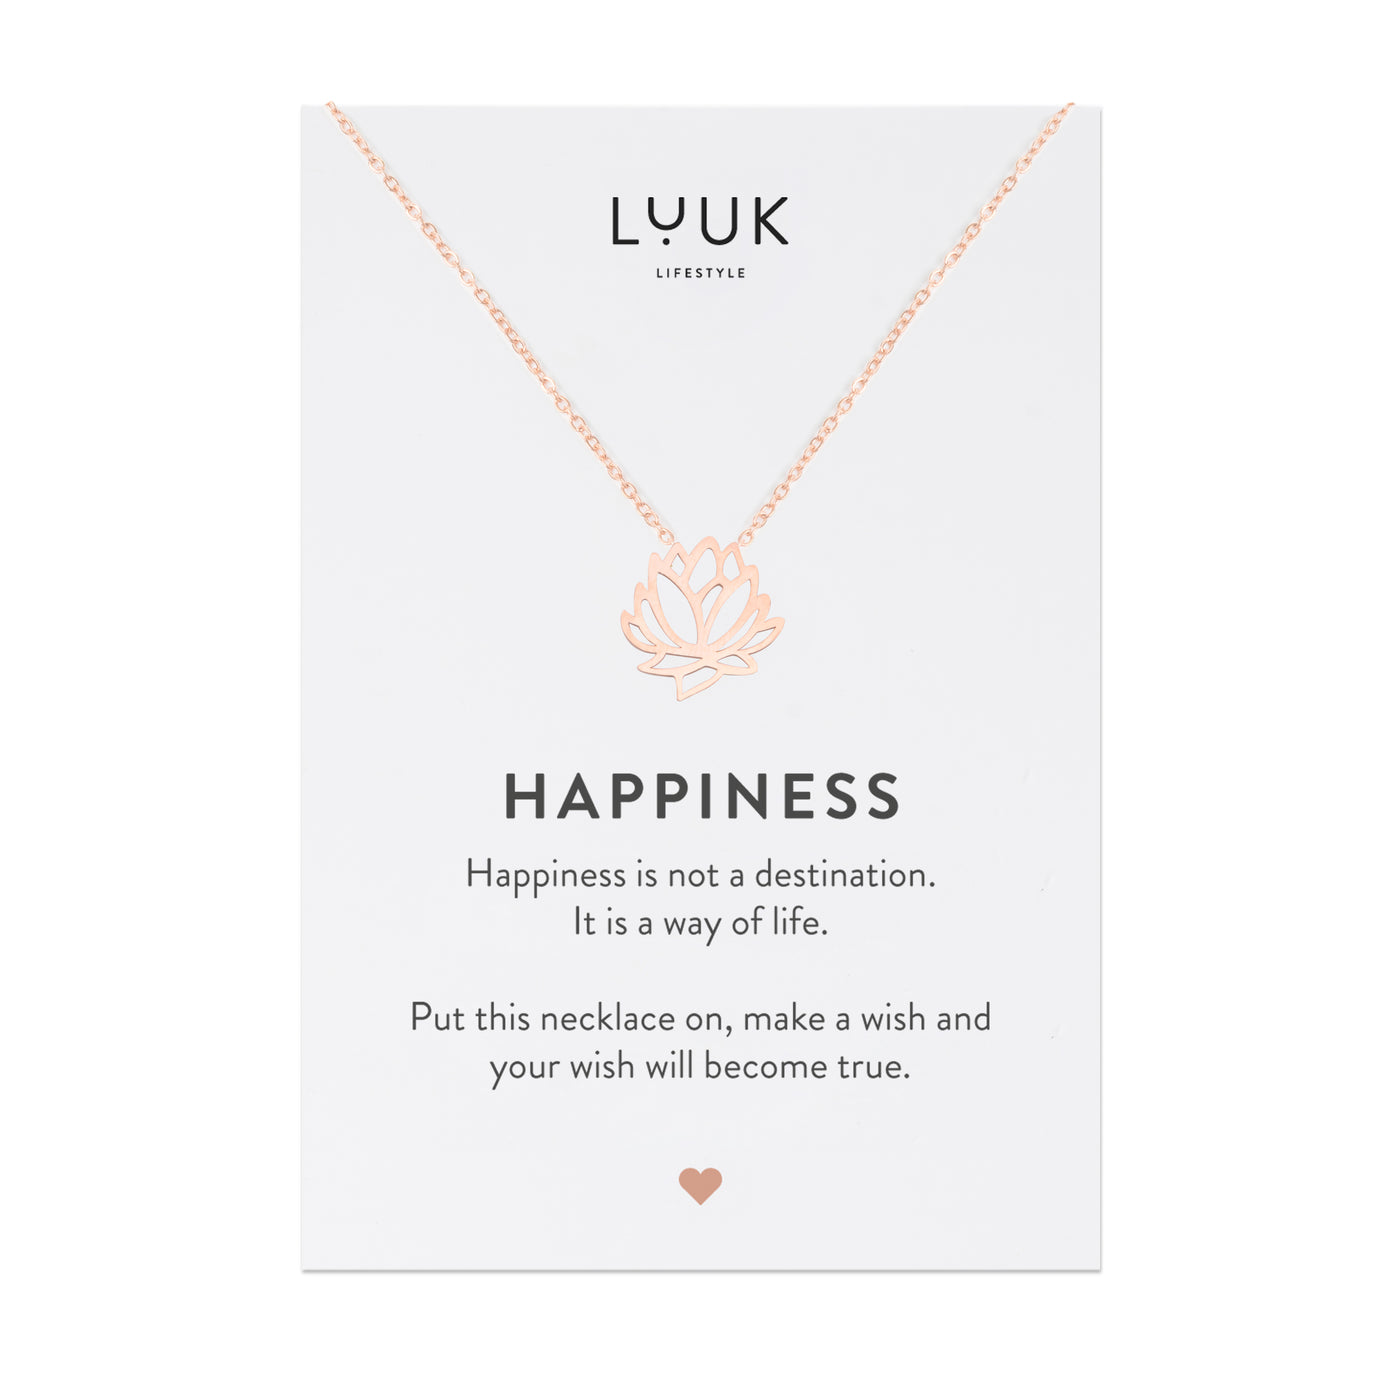 Necklace with lotus blossom pendant and Happiness greeting card